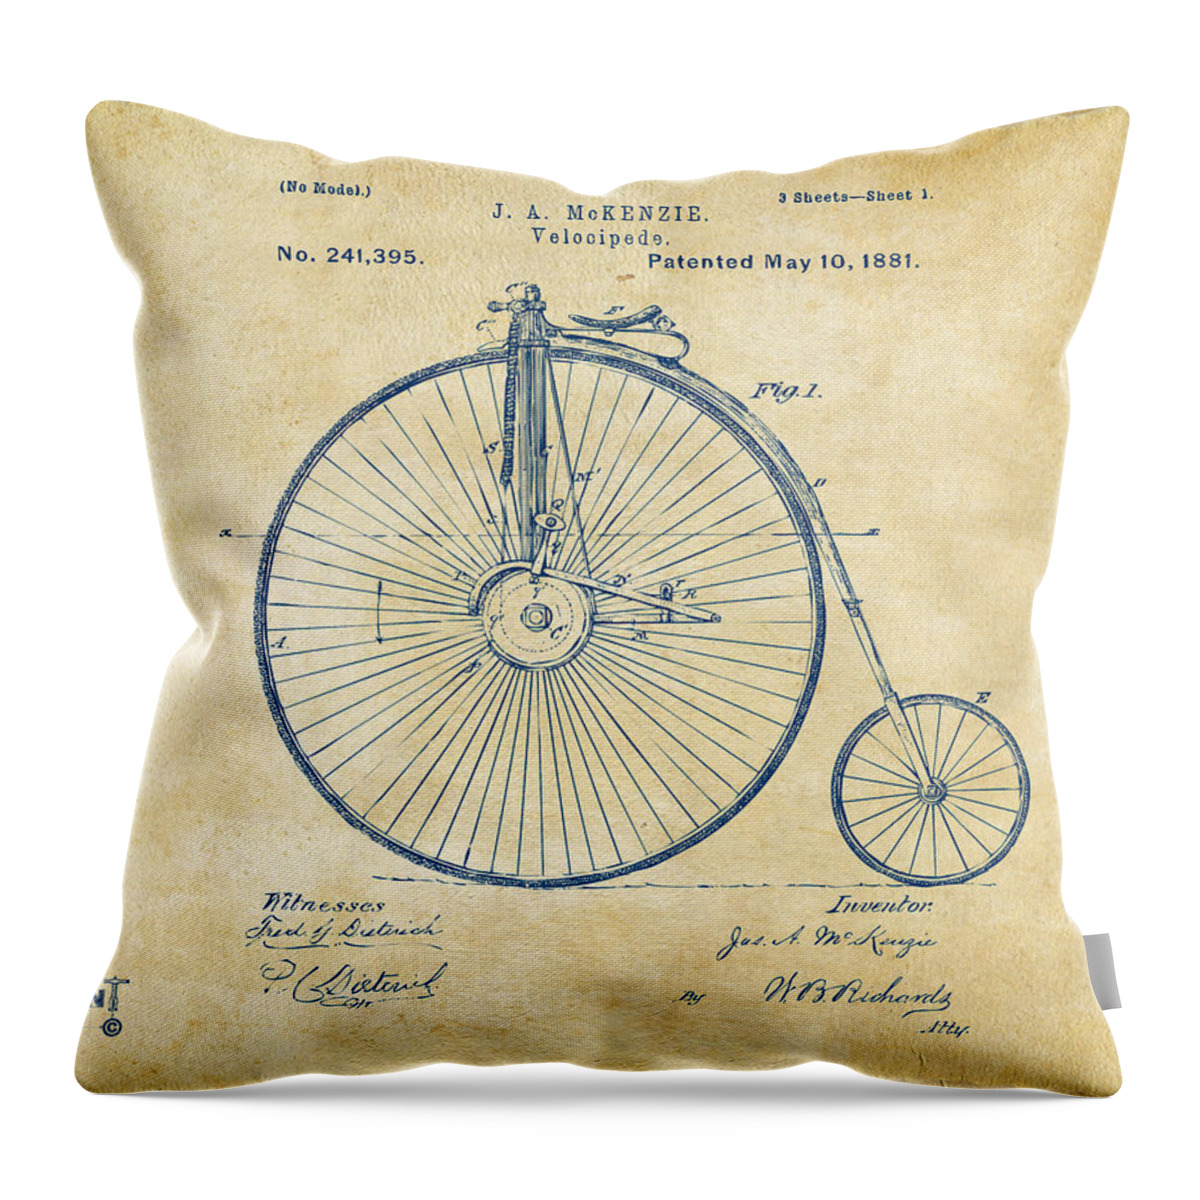 Velocipede Throw Pillow featuring the digital art 1881 Velocipede Bicycle Patent Artwork - Vintage by Nikki Marie Smith